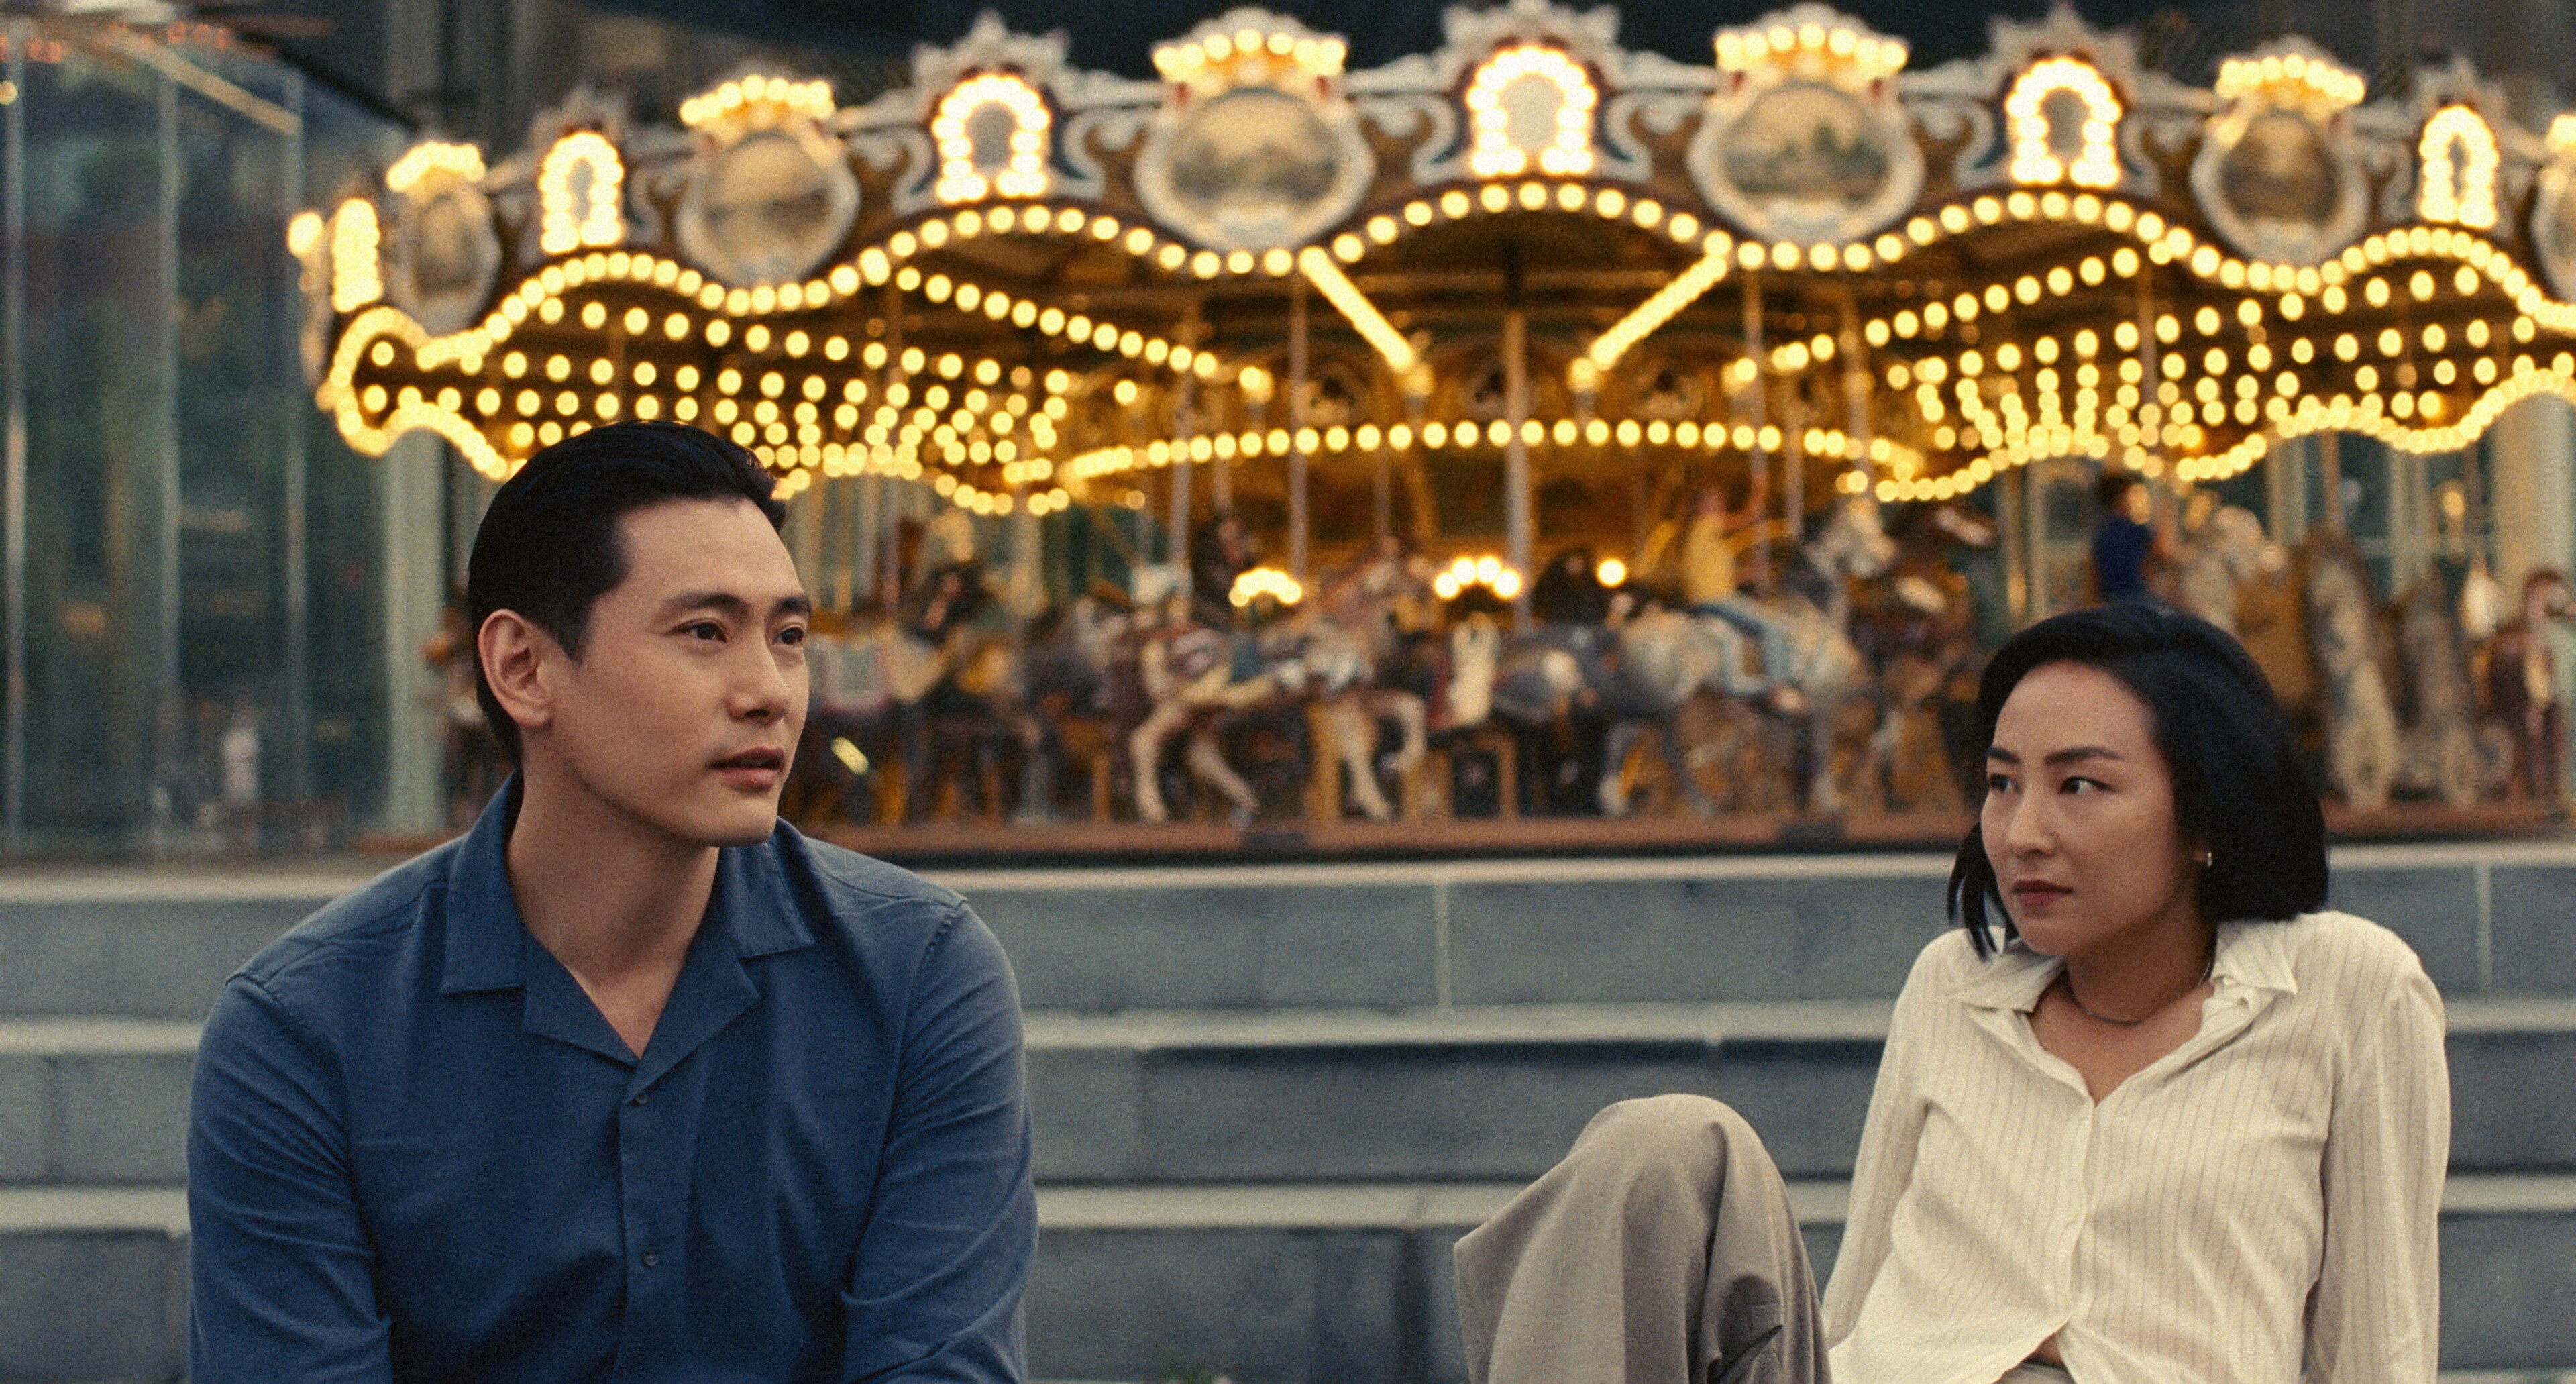 A Korean man with dark hair in a navy shirt sits in front of merry-go-round beside a dark-haired Korean woman in a white blouse